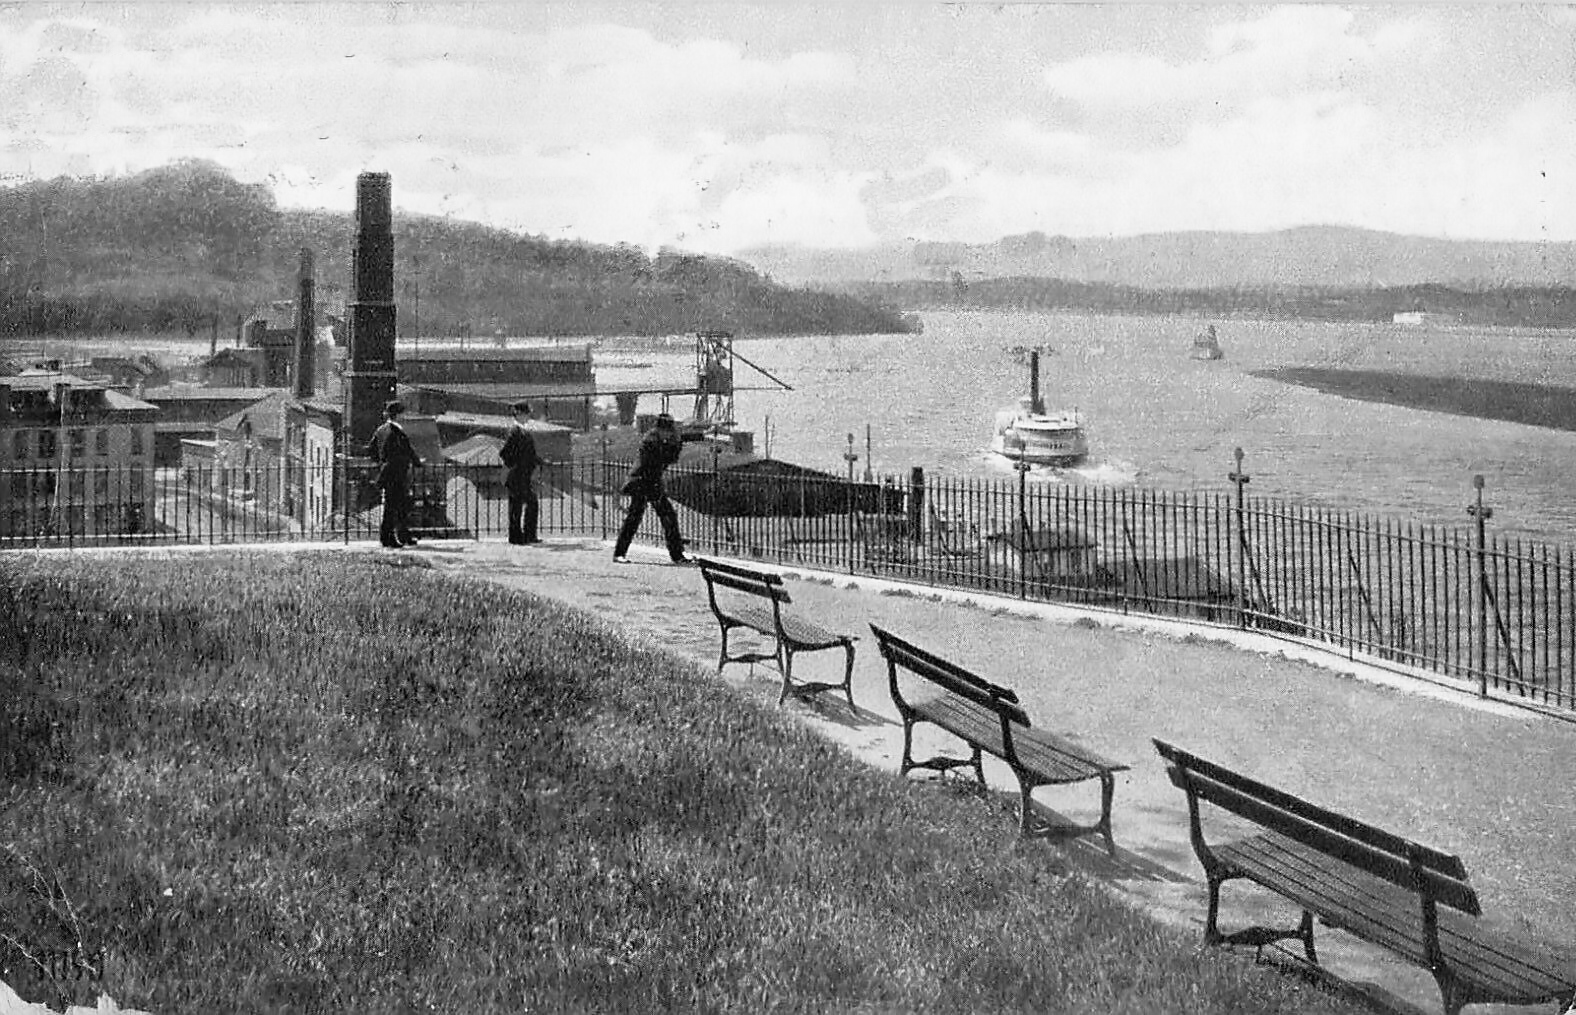 Looking South From Promenade Hill In Hudson NY, Columbia County 1910